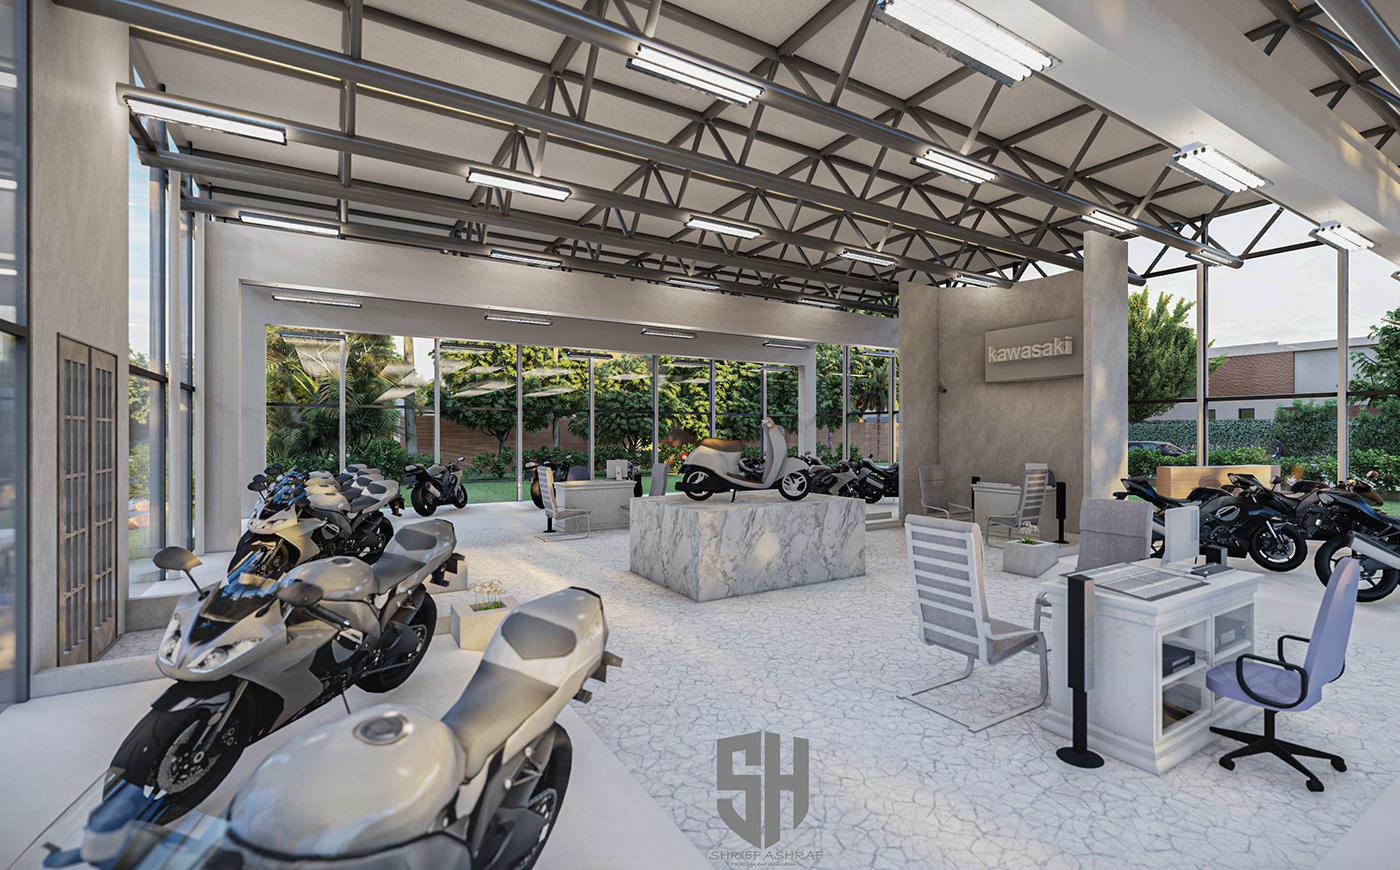 3D 3ds max architecture corona Exhibition  exterior Freelance motorcycle Render visualization